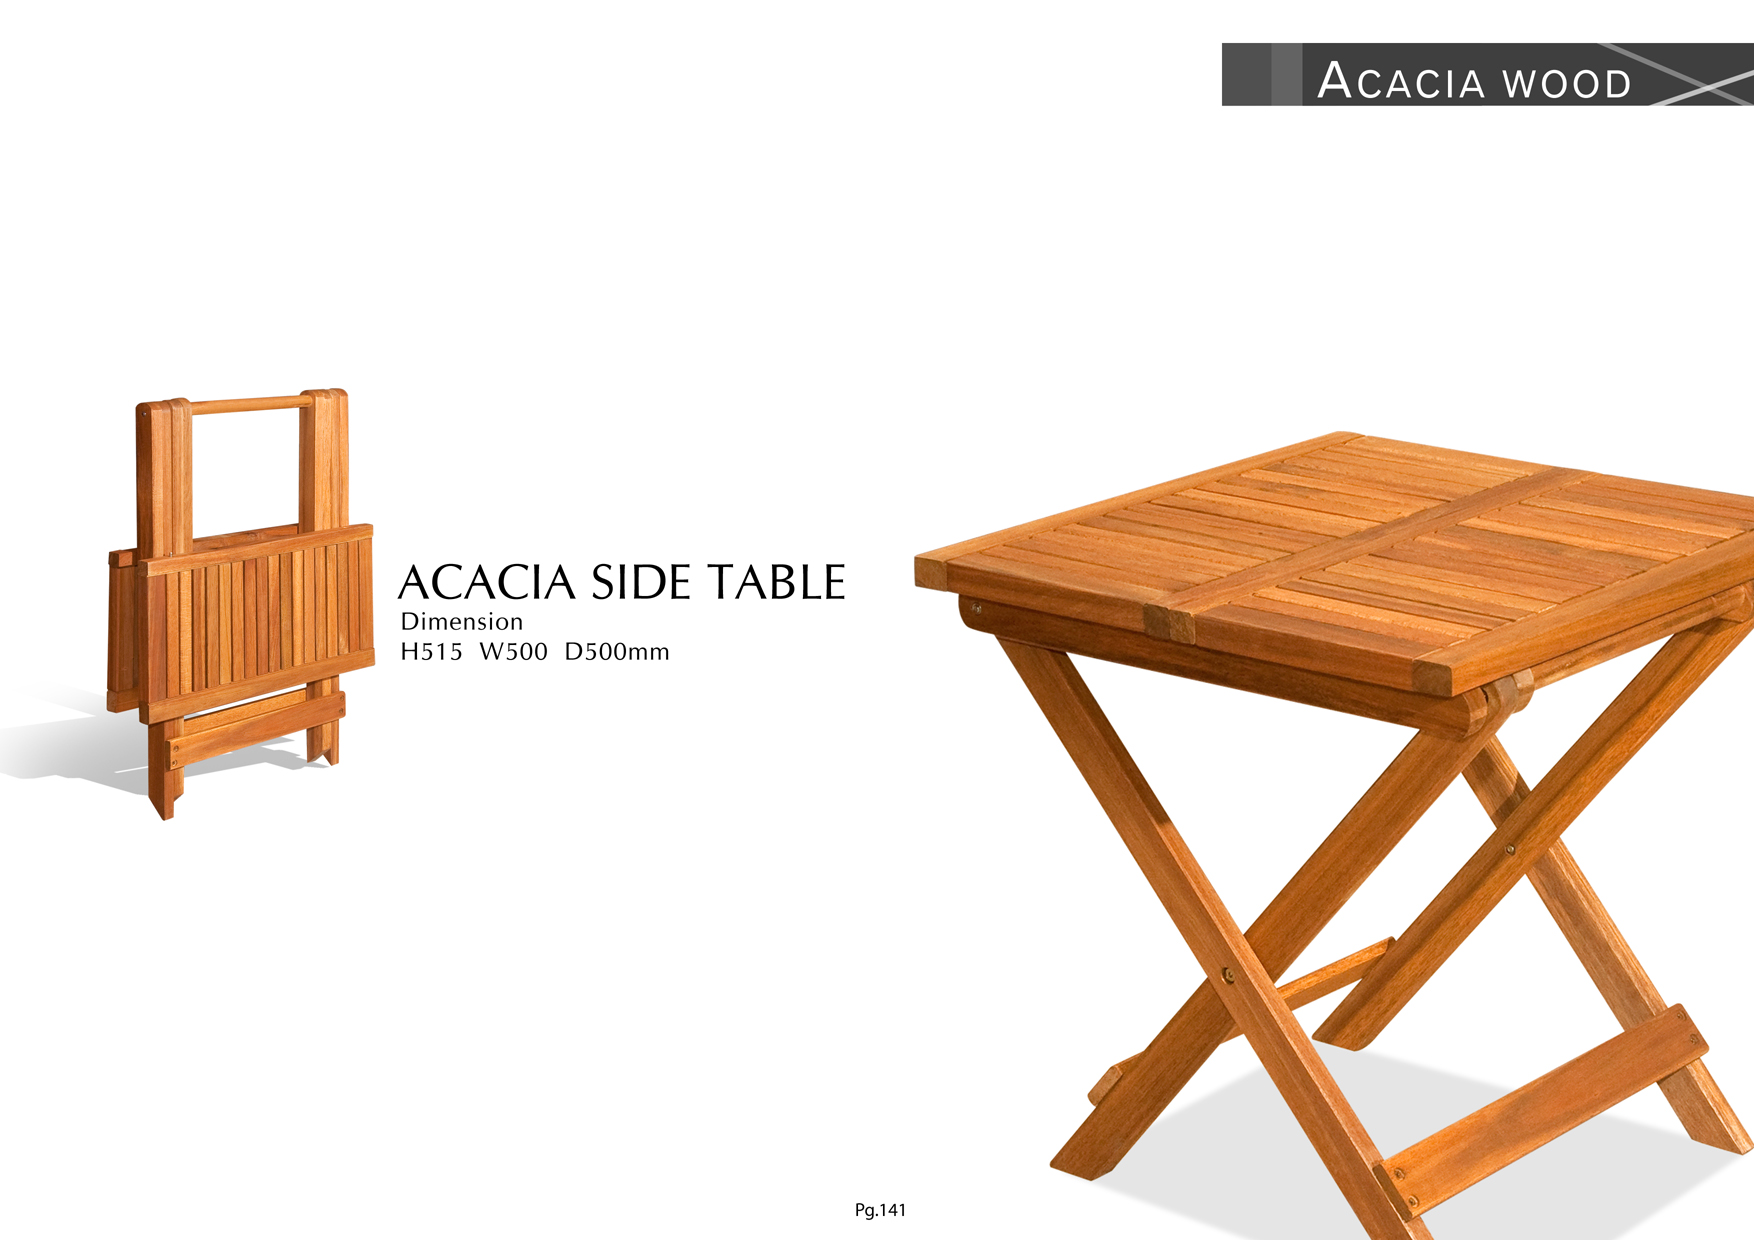 Product: PG141. ACACIA SIDE TABLE